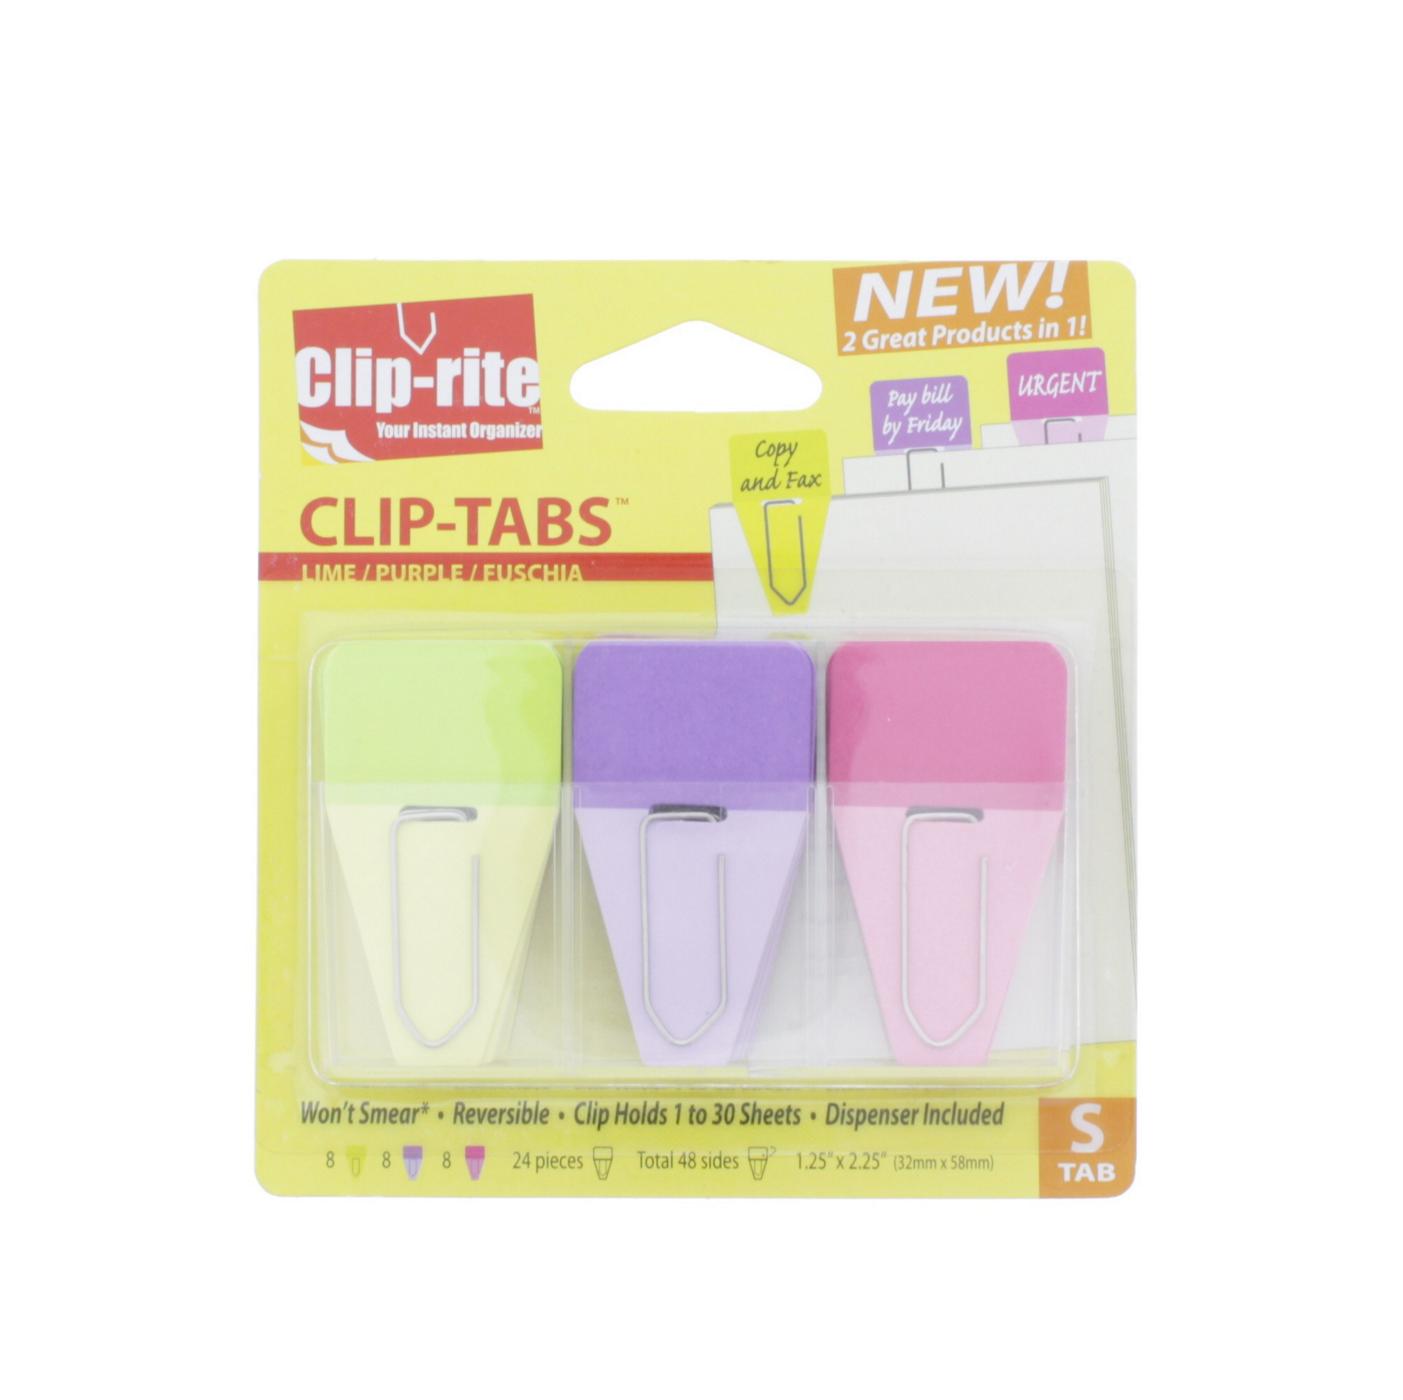 Clip-rite Clip-tabs Small Solid Assorted; image 1 of 2